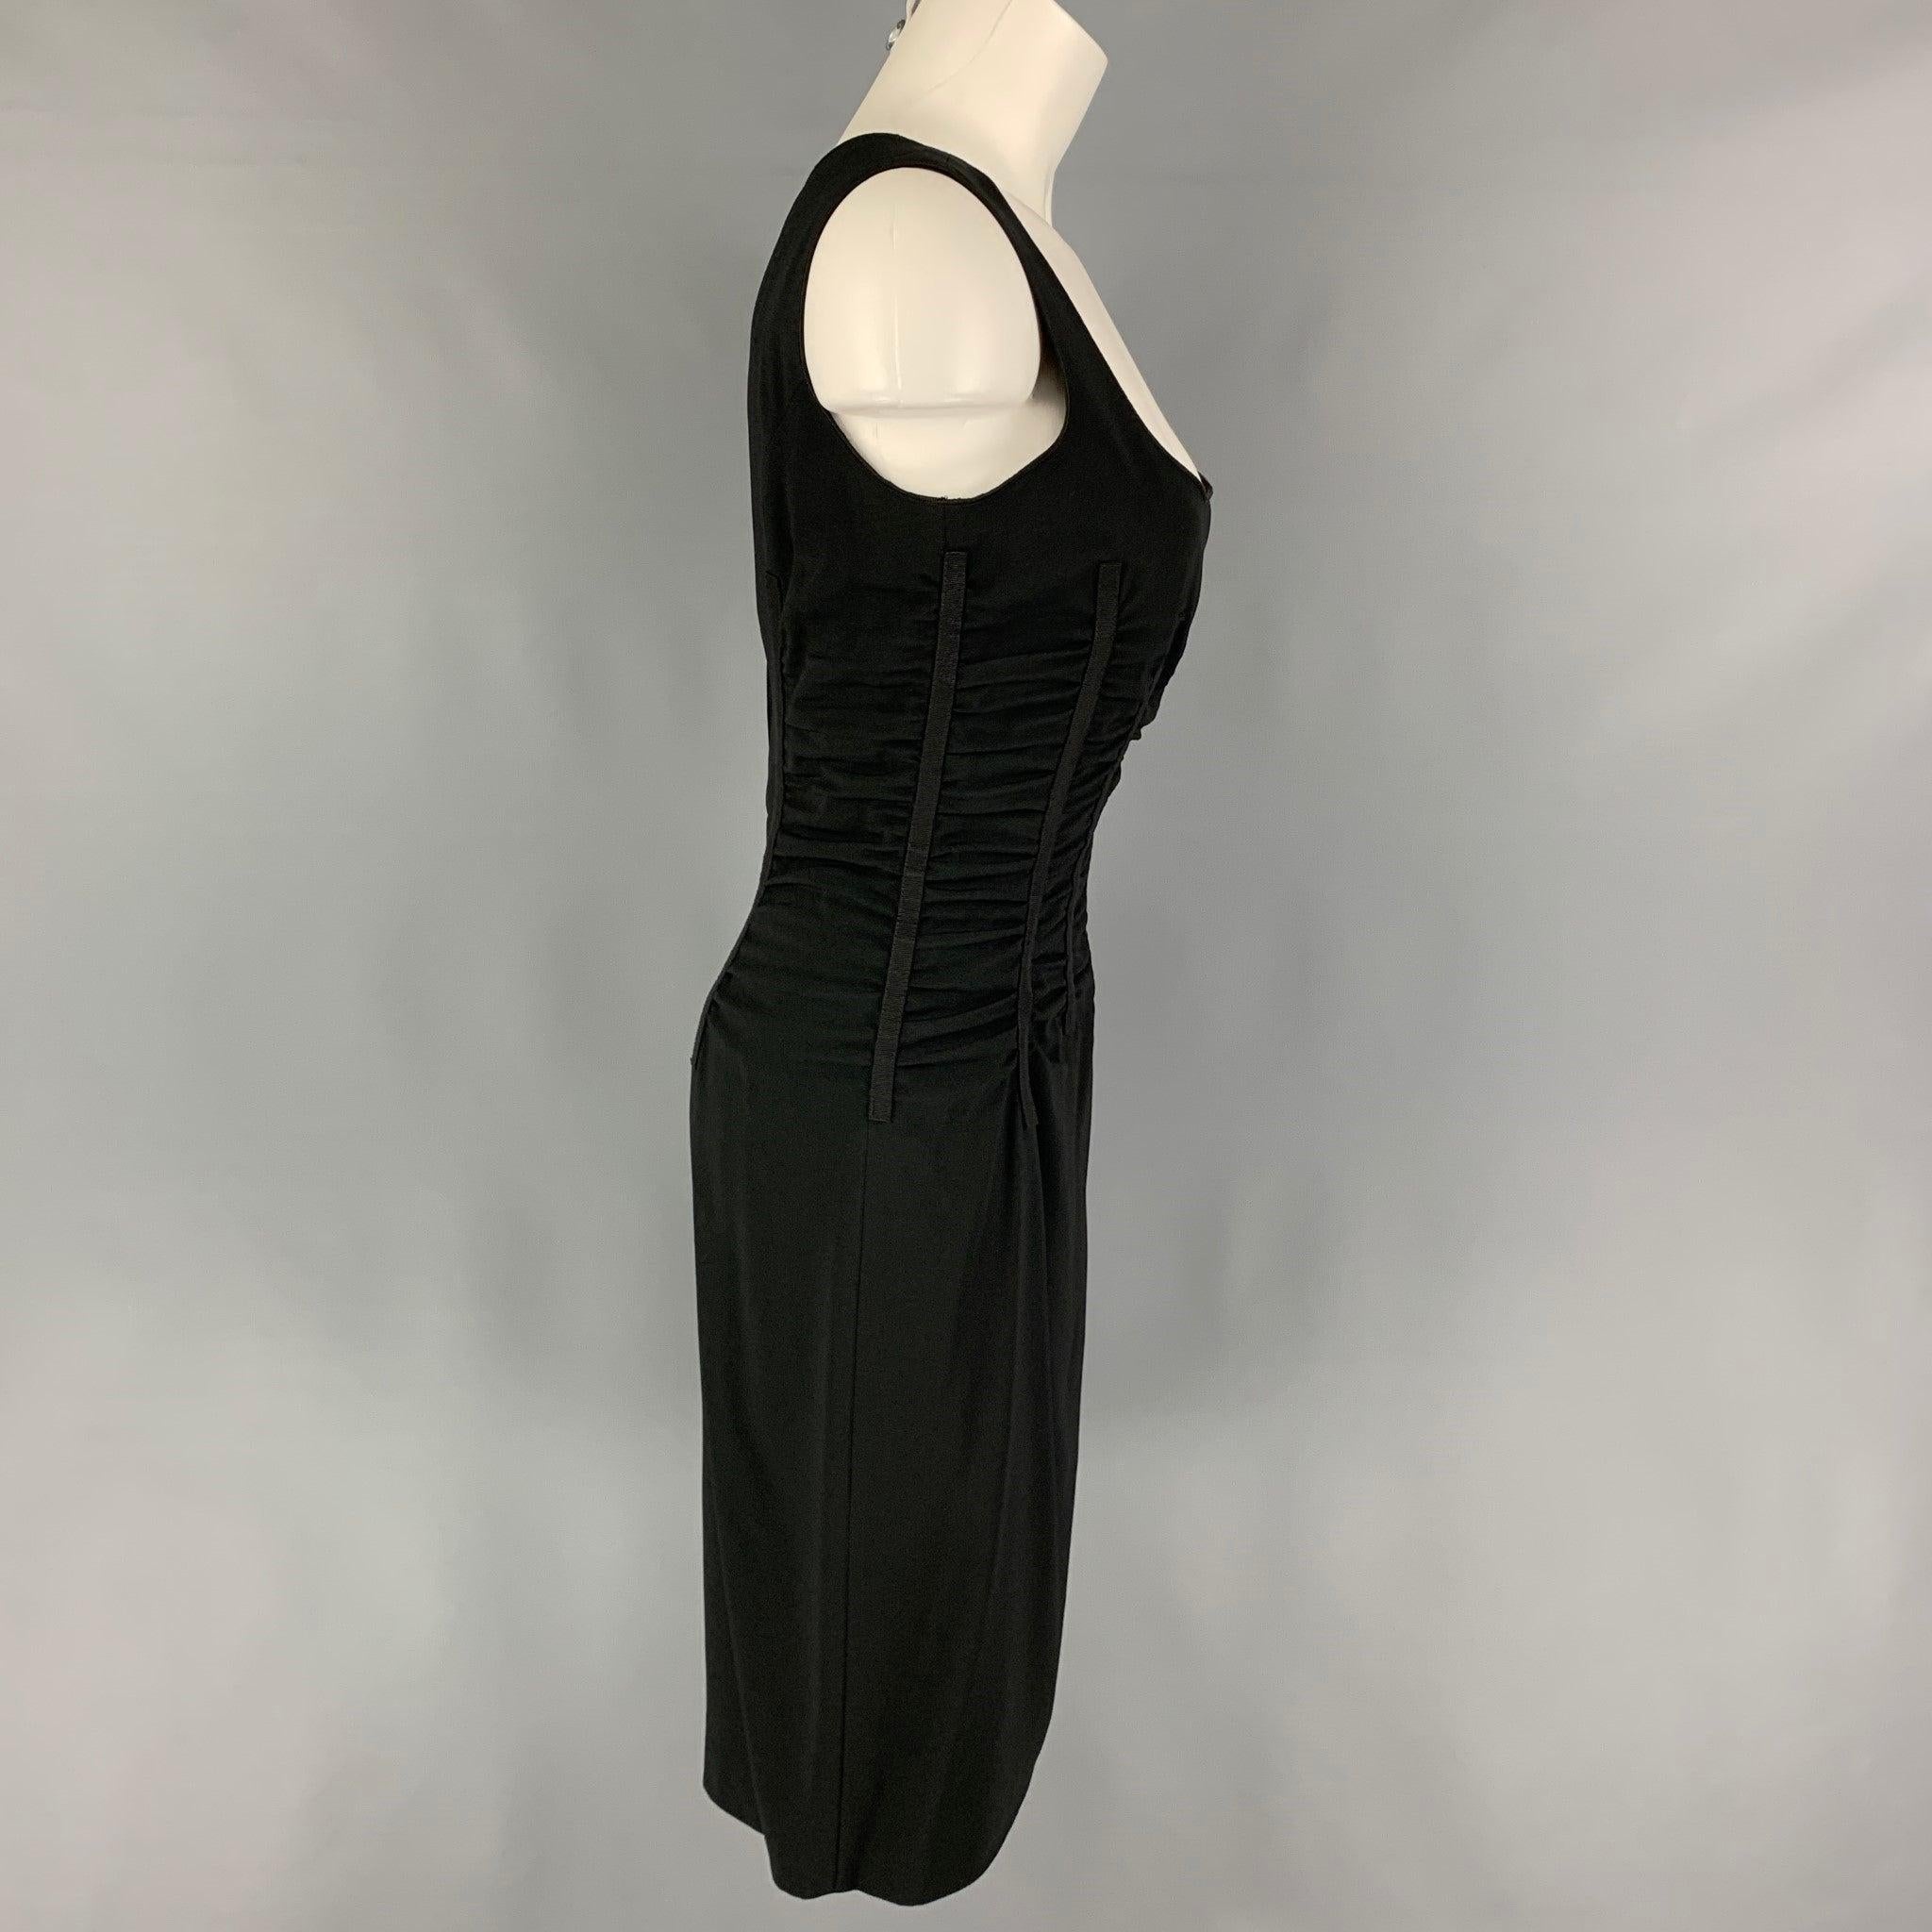 DOLCE & GABBANA Size 6 Black Acetate Blend Ruched Sleeveless Cocktail Dress In Good Condition For Sale In San Francisco, CA